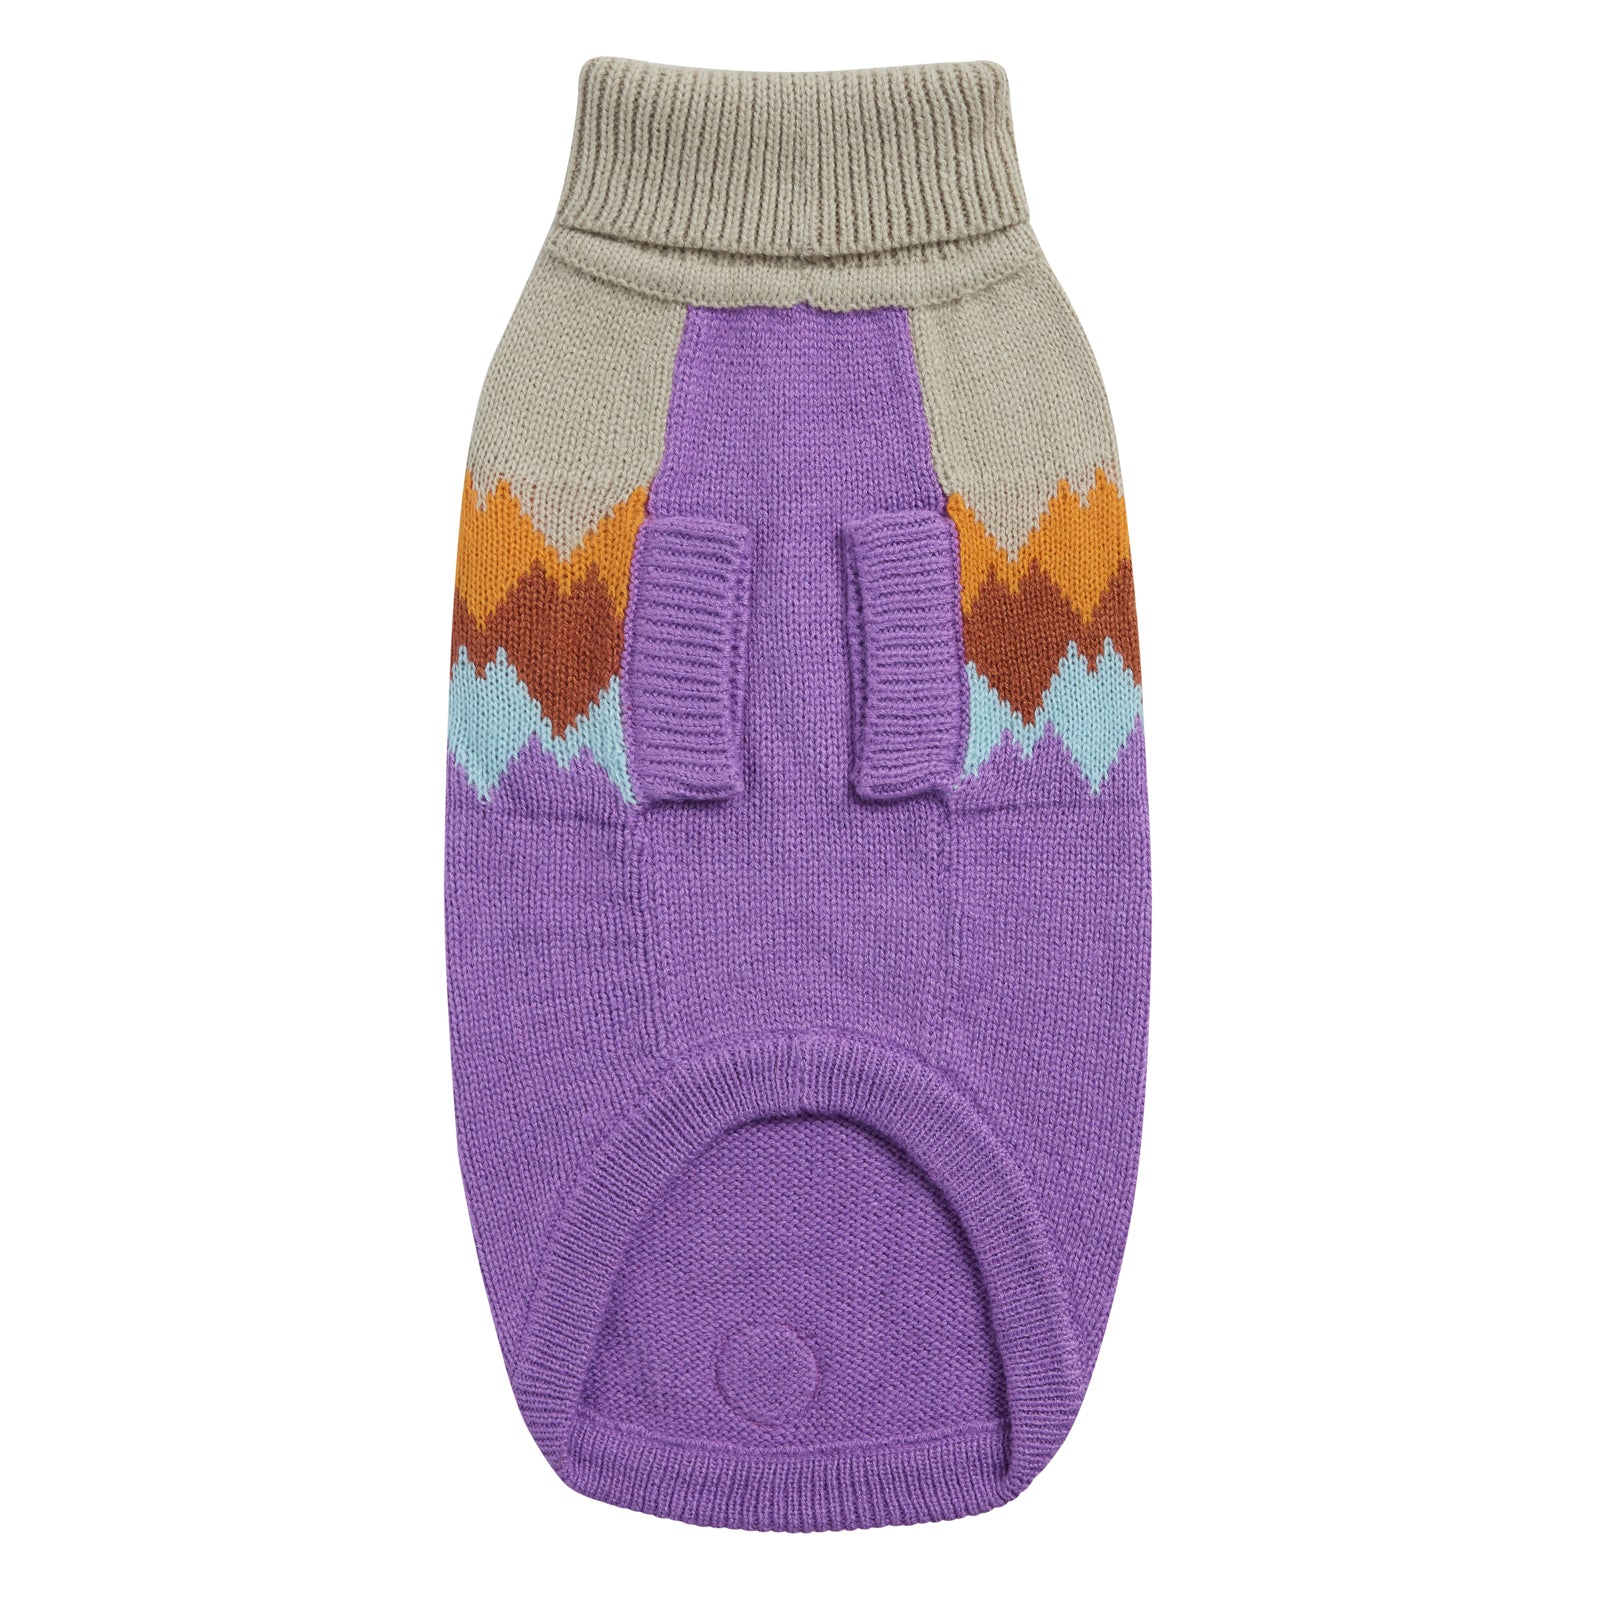 the underside of a beige and purple dog sweater with colorful mountain peaks graphic